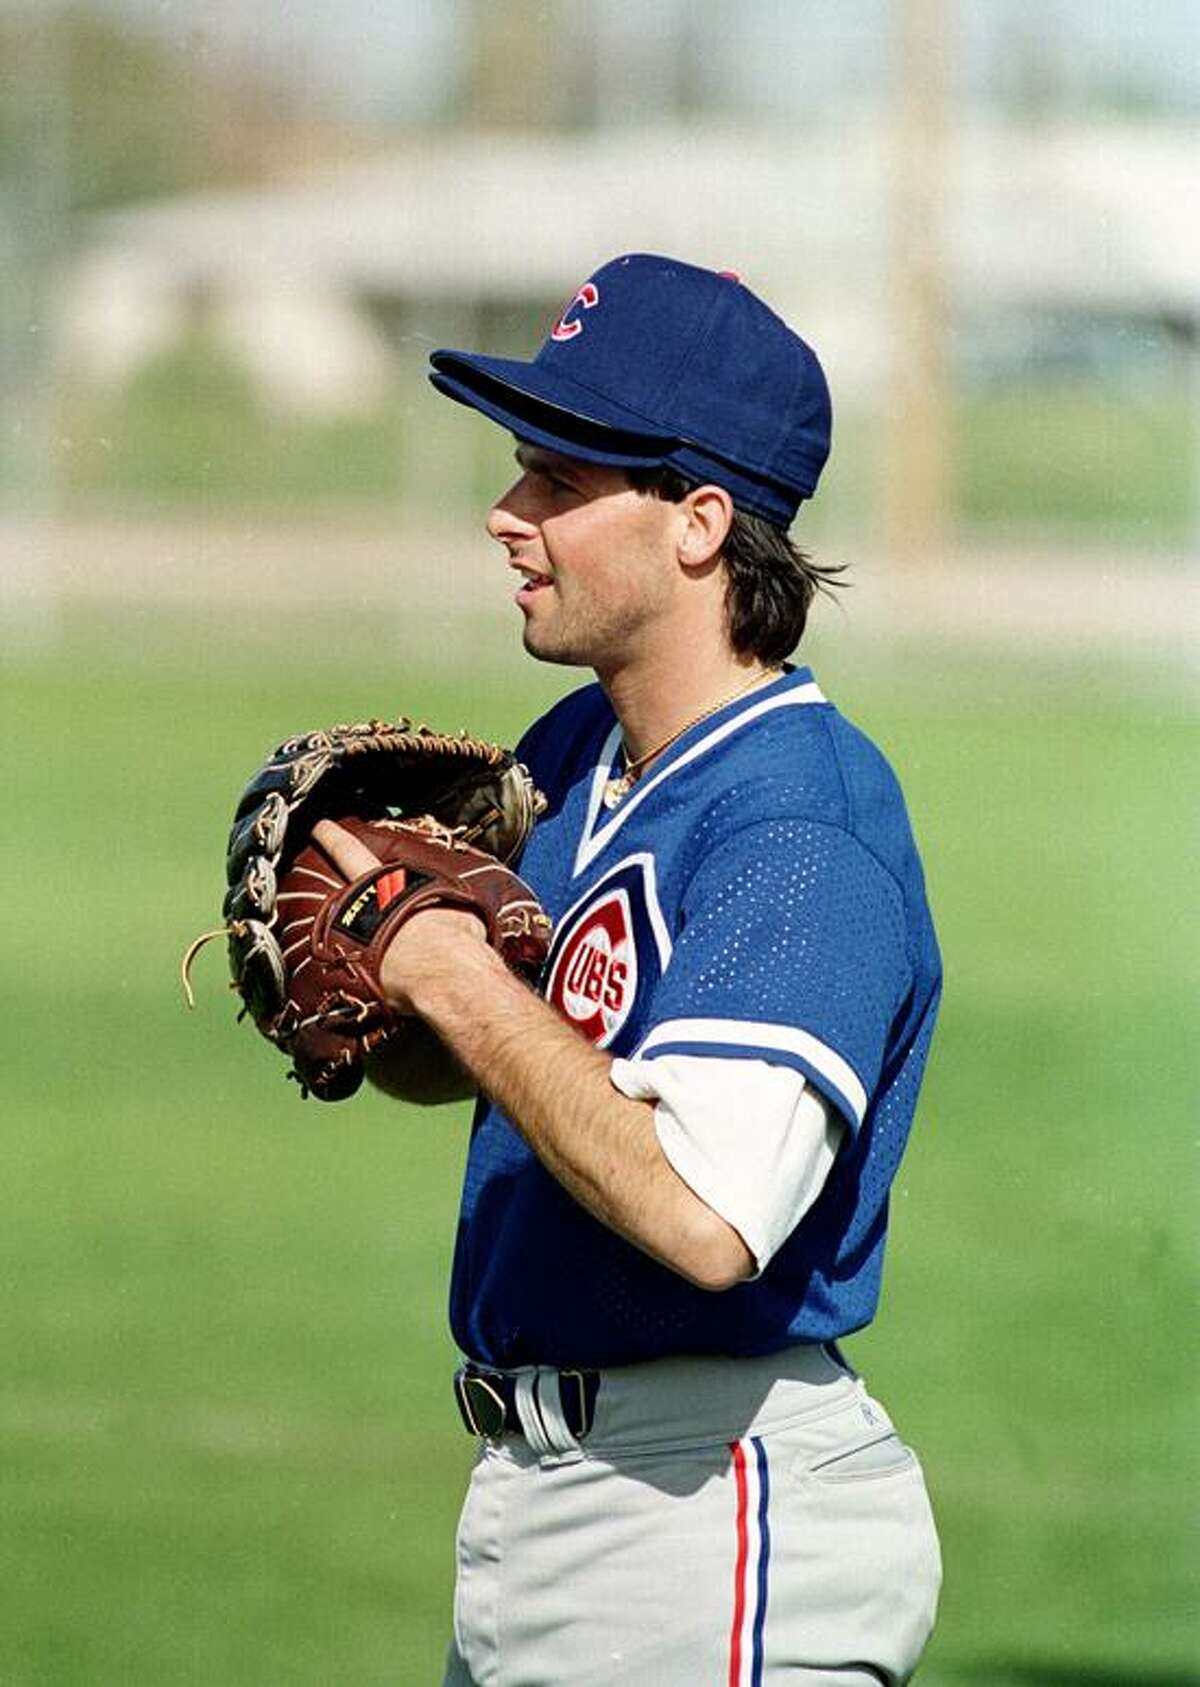 Chicago Cubs pitcher Turk Wendell wears two gloves and caps during a spring training workout at the club's facility in Mesa, Ariz., March 25, 1992. (AP Photo)